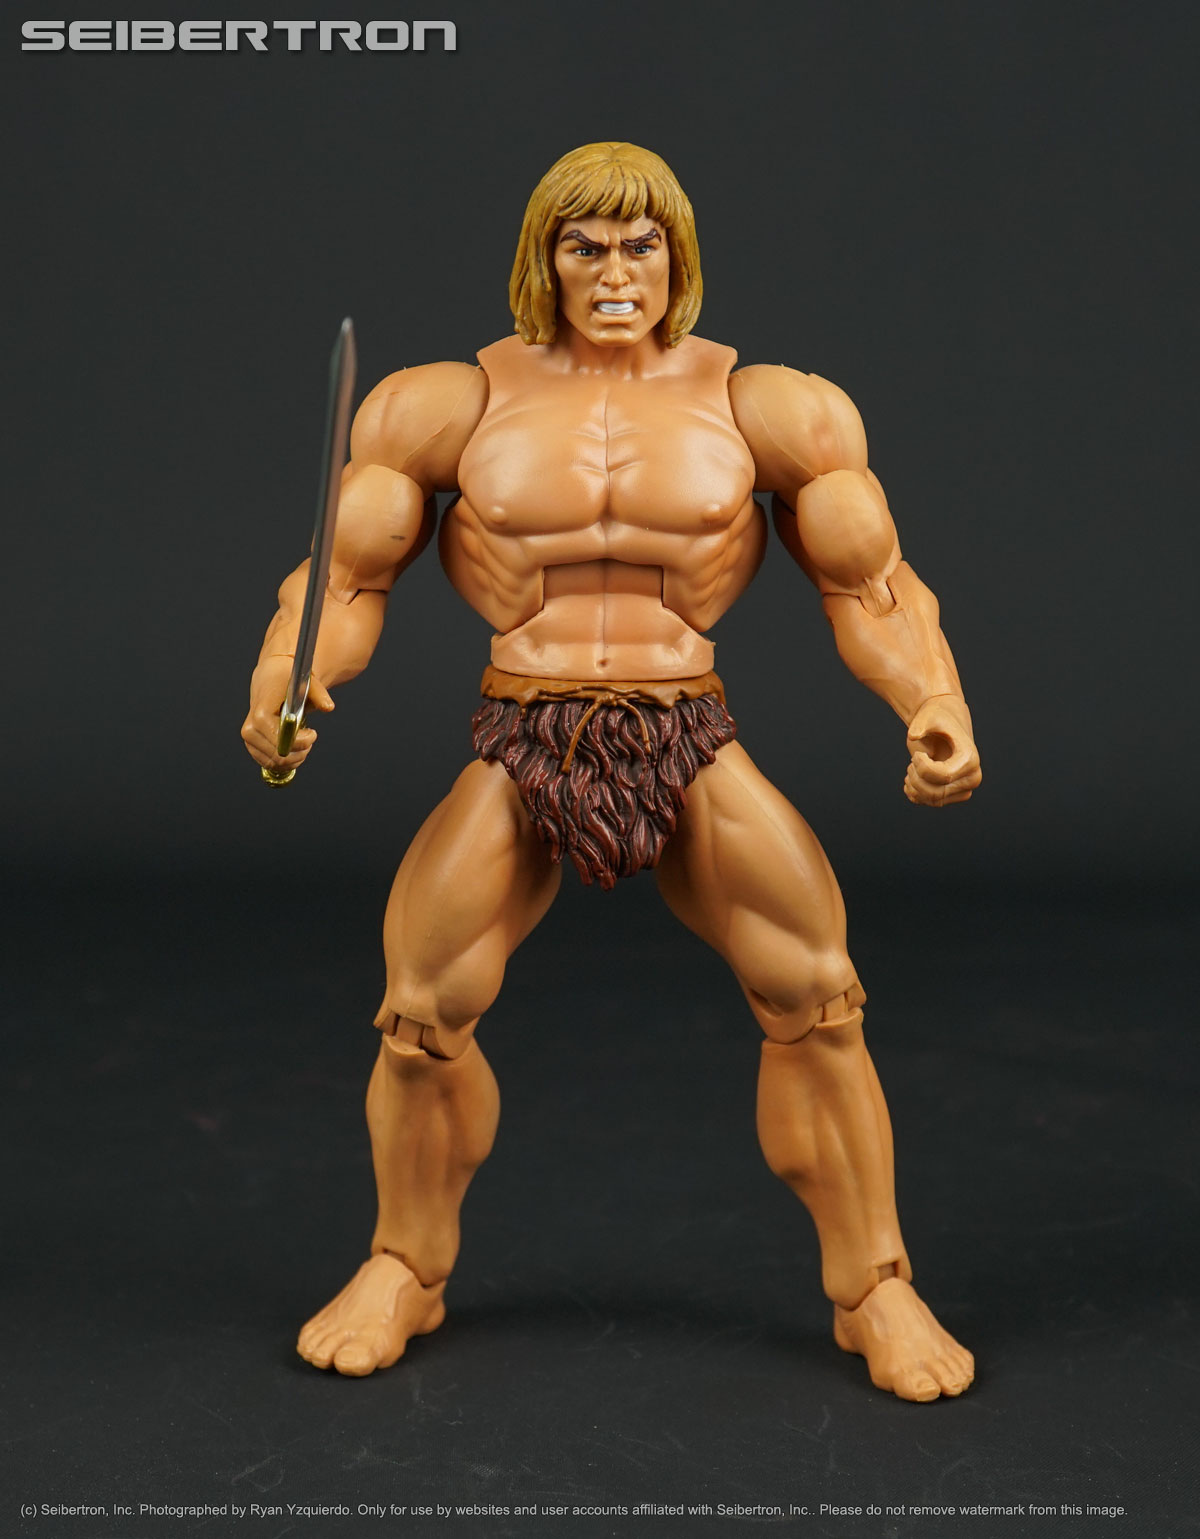 Transformers, Masters of the Universe, Teenage Mutant Ninja Turtles, Gobots, Comic Books, Shopkins, and other listings from Seibertron.com: OO-LARR Masters of the Universe Classics 100% complete MOTUC Savage He-Man HEAD